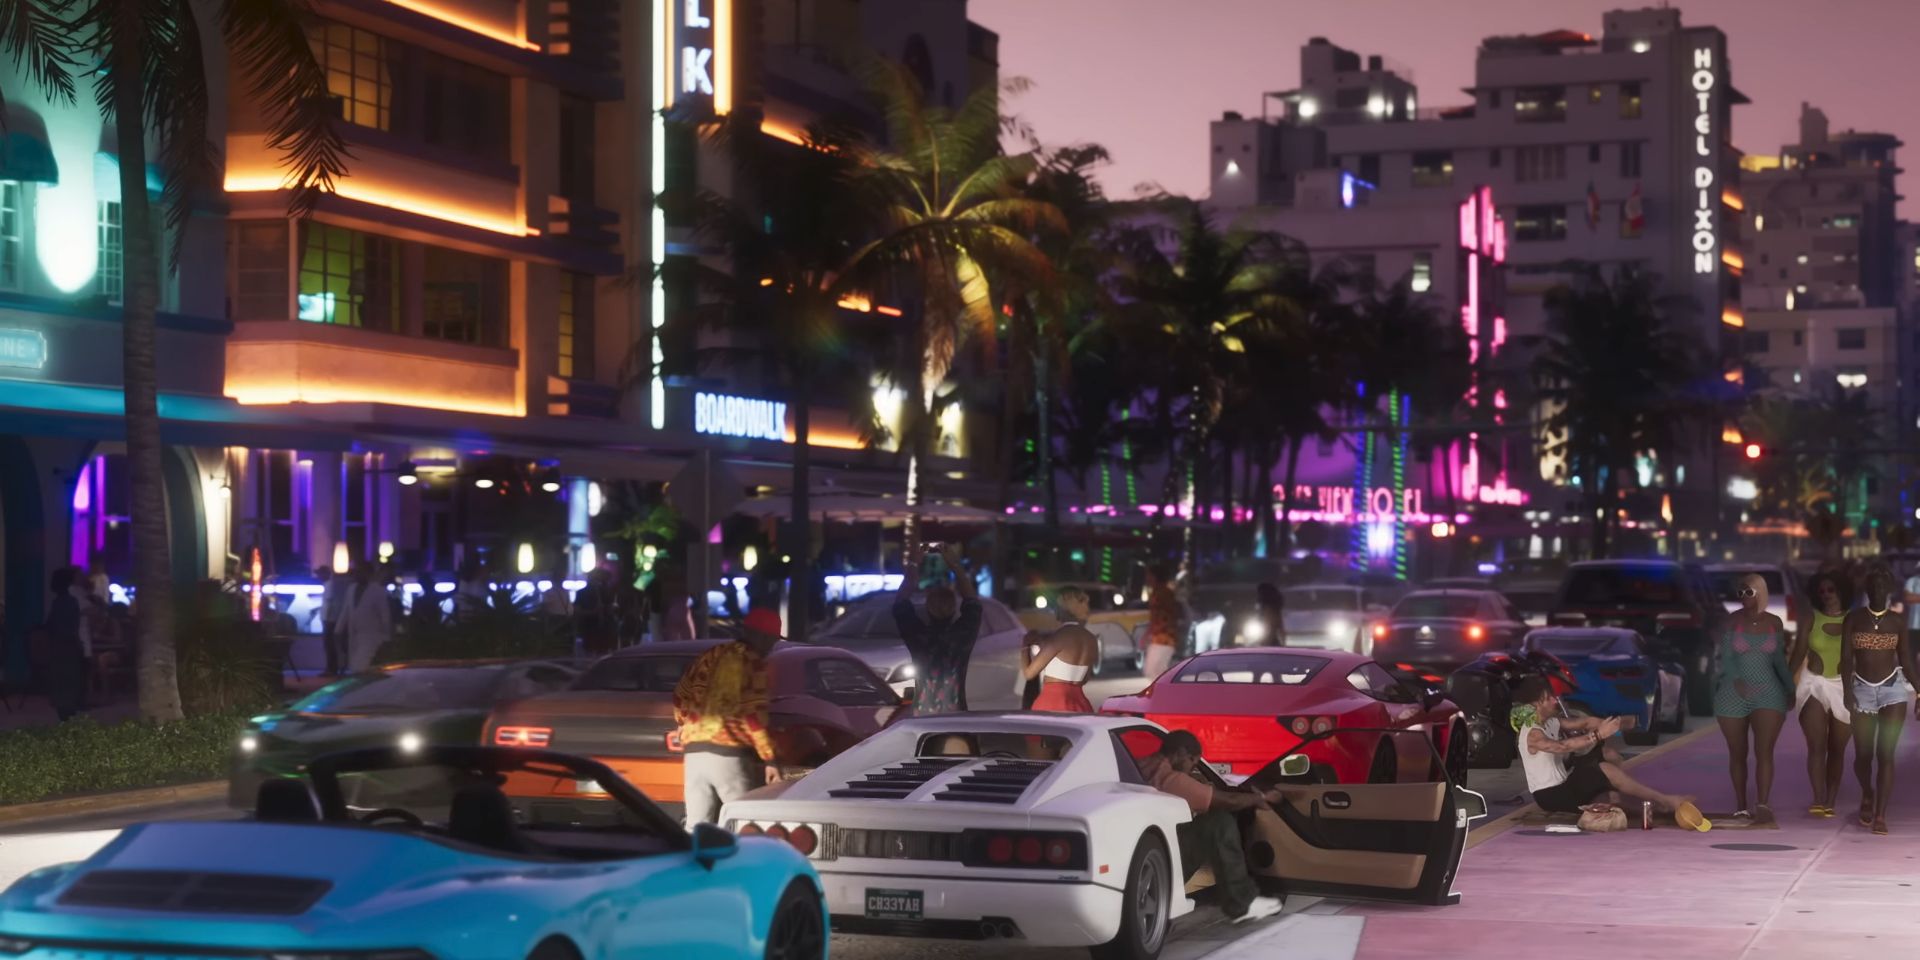 The main nightlife strip in the trailer for GTA 6. Lines of sports cars, neon-lit art deco buildings, and palm trees in a line down the middle.